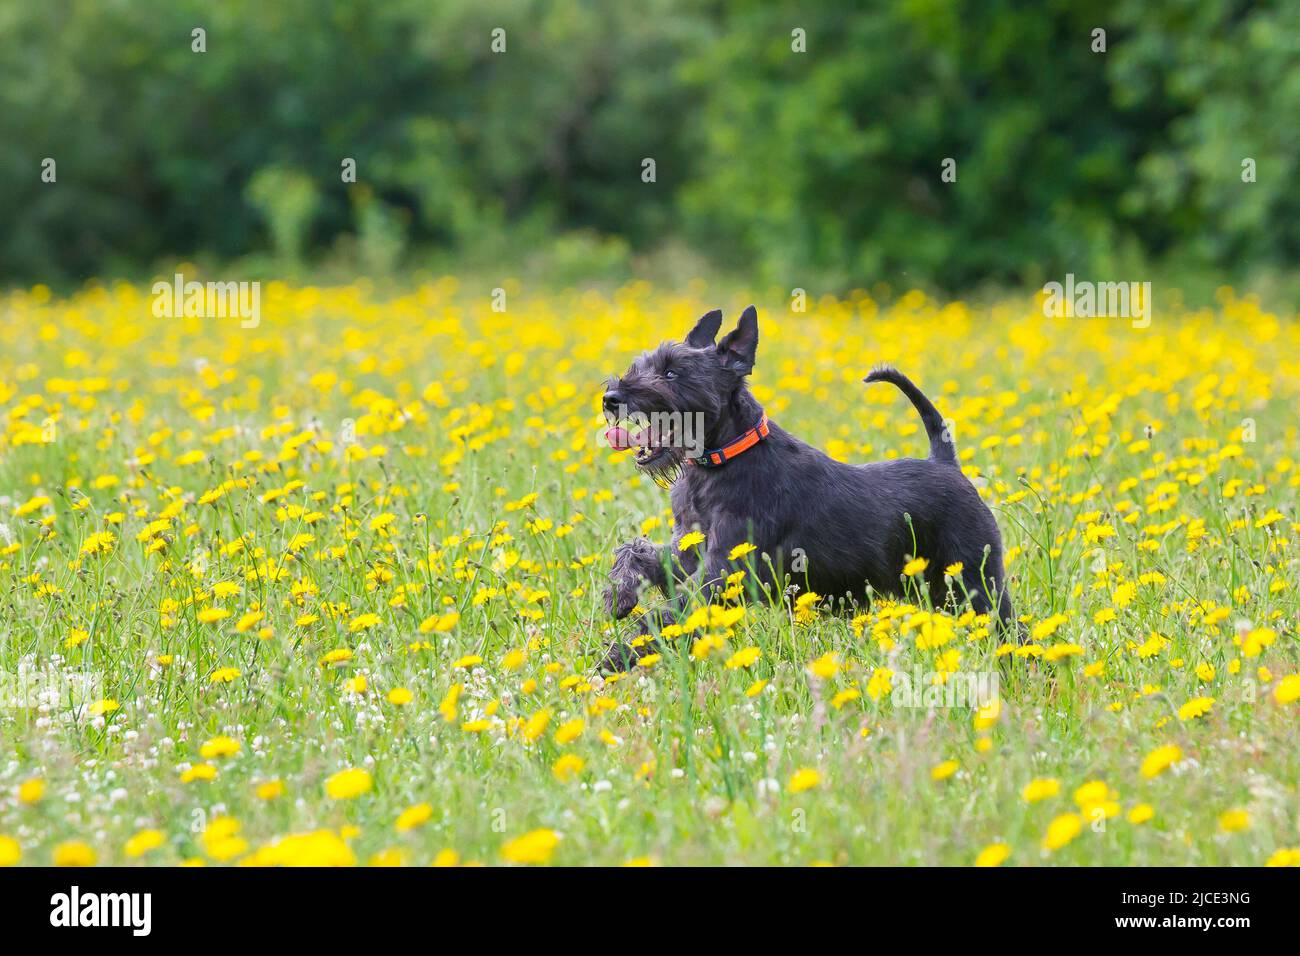 Kidderminster, UK. 12th June. 2022. UK weather: with lovely, warm temperatures and sunny conditions, today is a perfect day to play in the park. This pet Schnauzer dog races through the dandelions in a country park. Credit: Lee Hudson/Alamy Live News Stock Photo